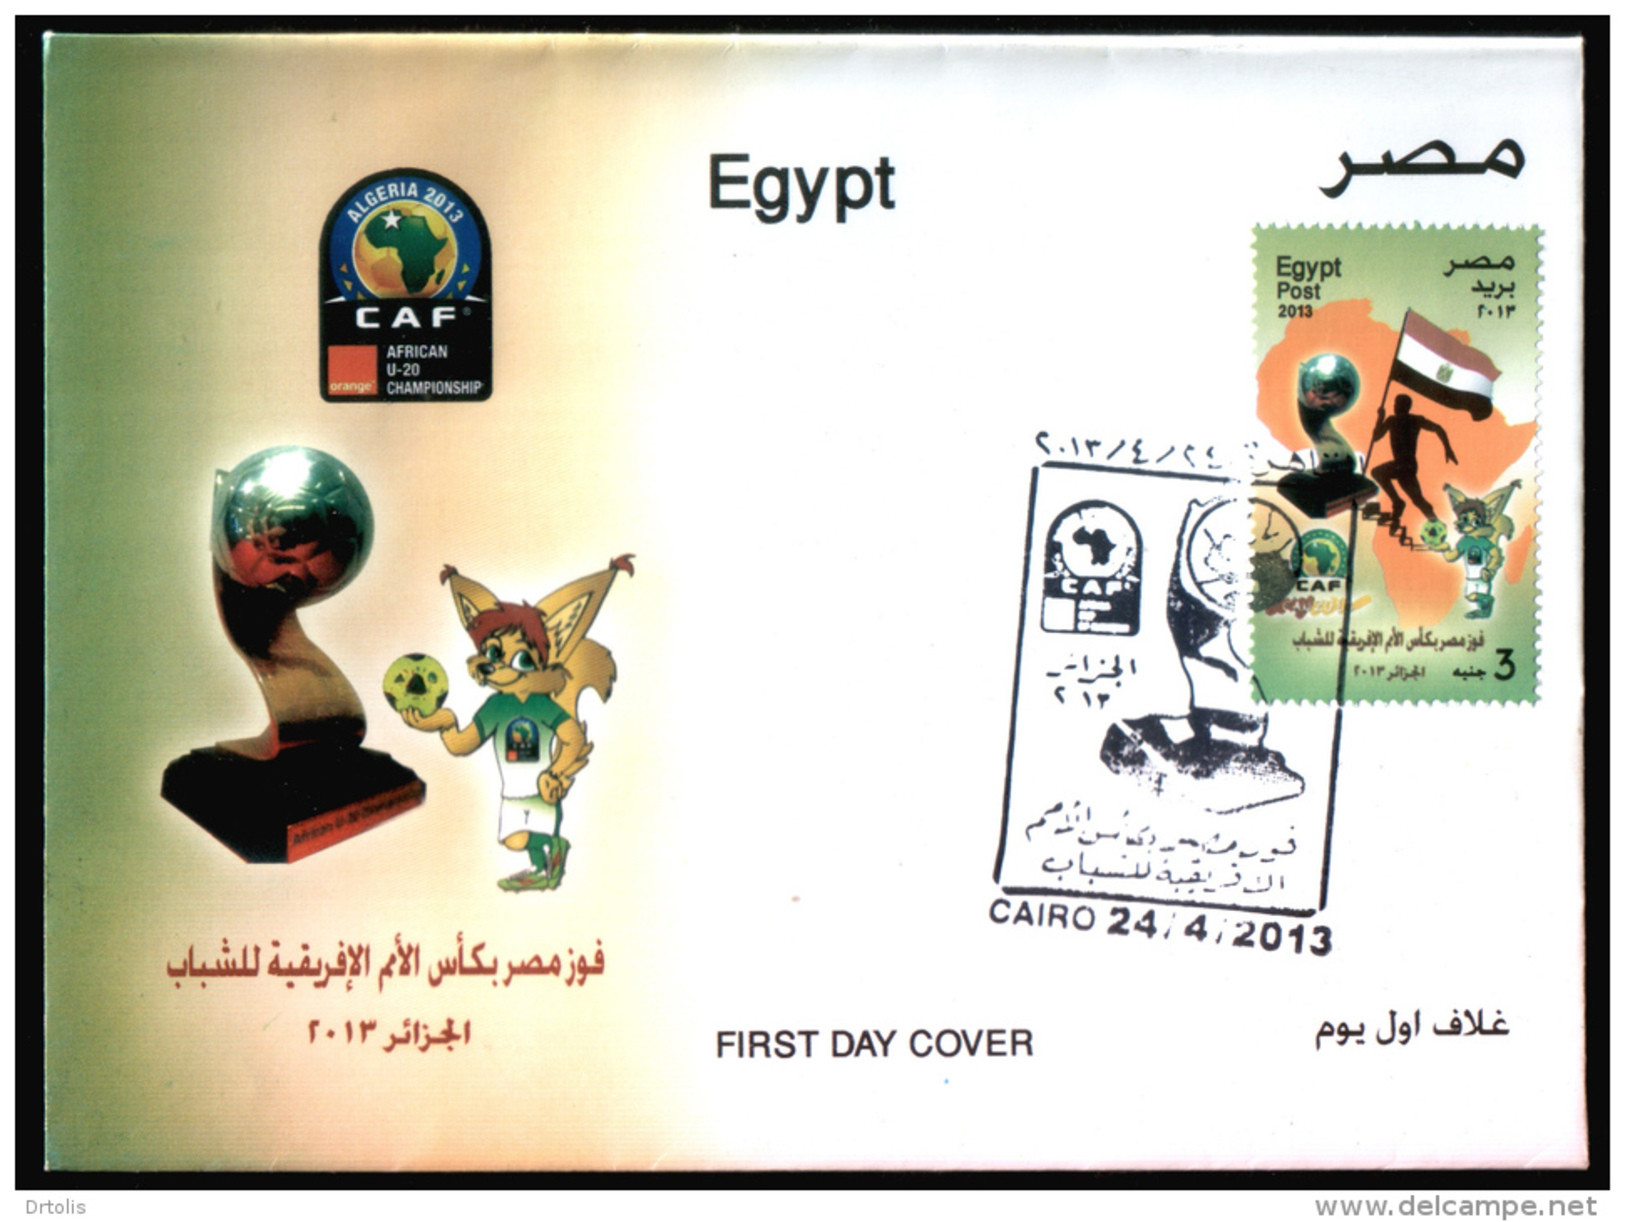 EGYPT / 2013 / SPORT / FOOTBALL / CAF / AFRICA CUP OF NATIONS SOCCER TOURNAMENT FOR YOUTH ; ALGERIA / MAP / FLAG / FDC - Covers & Documents